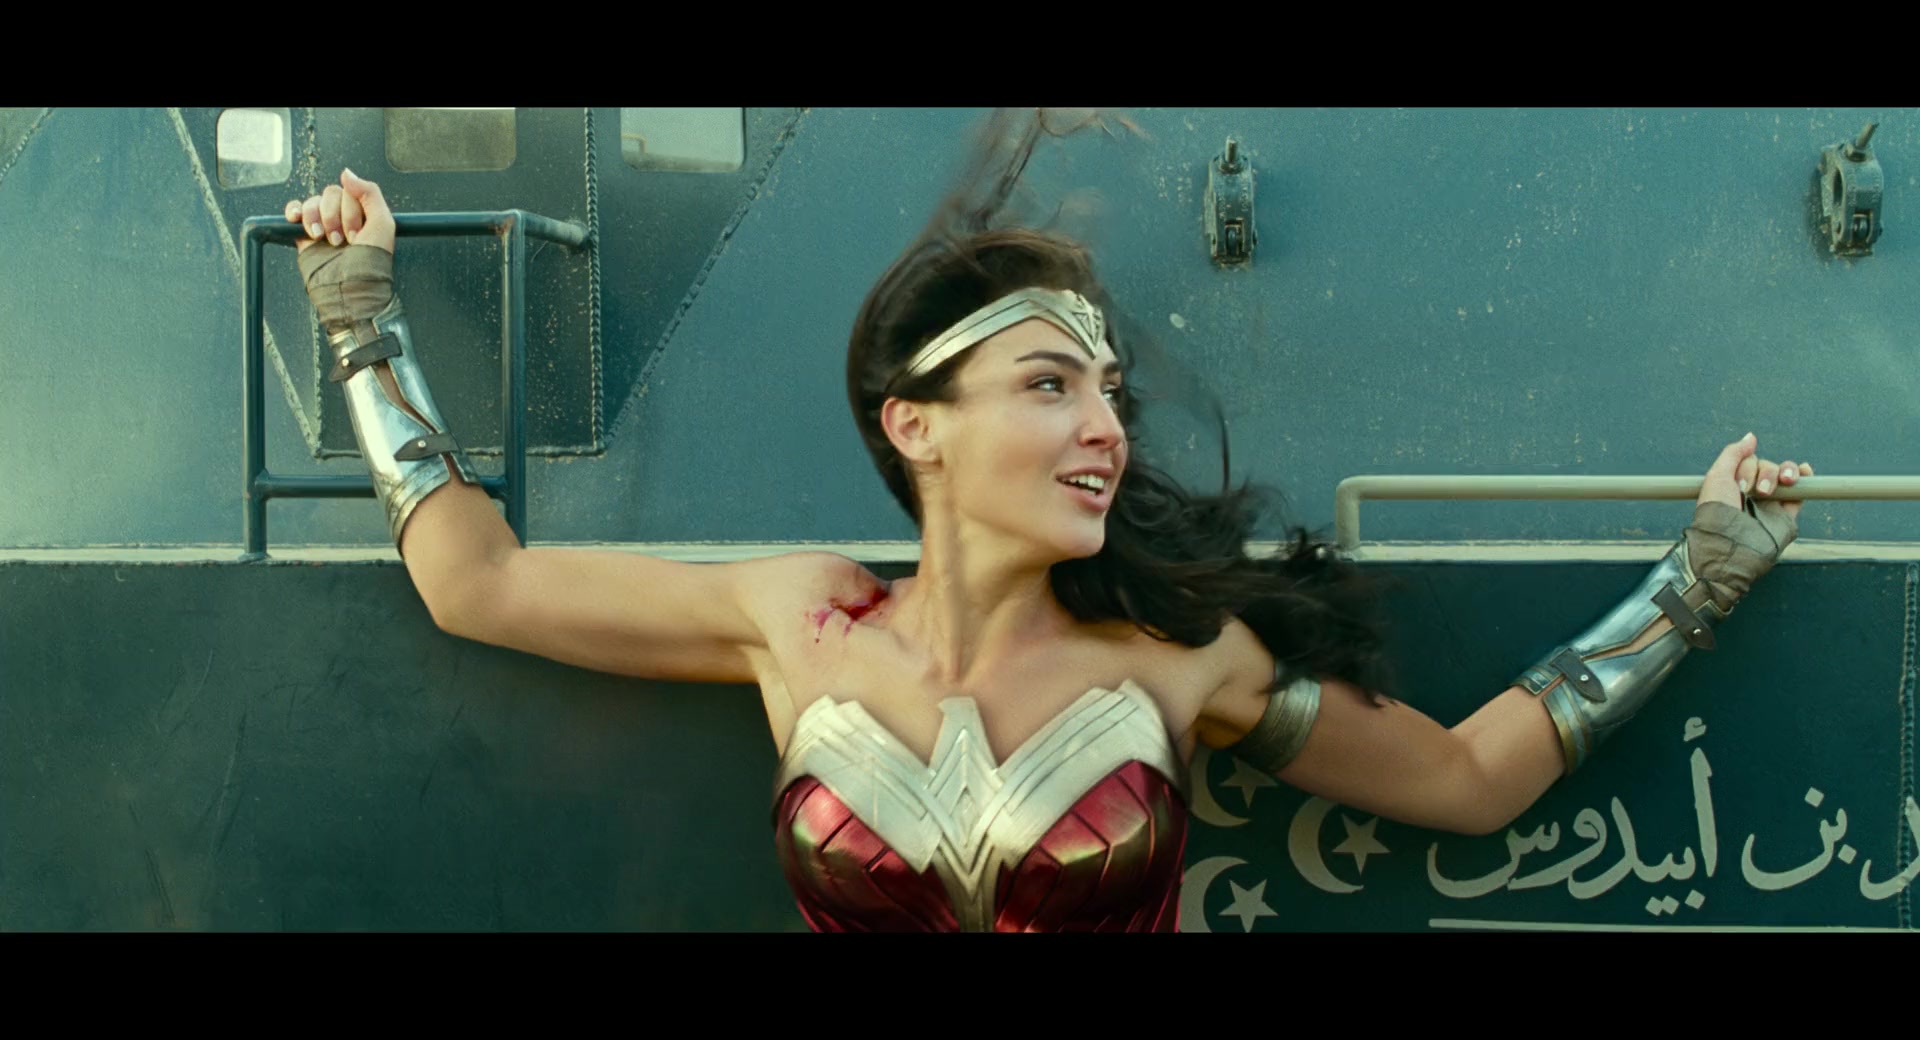 Diana (Gal Gadot) puts herself in between two armored vehicles in Wonder Woman 1984 (2020), Warner Bros. Pictures via Blu-ray